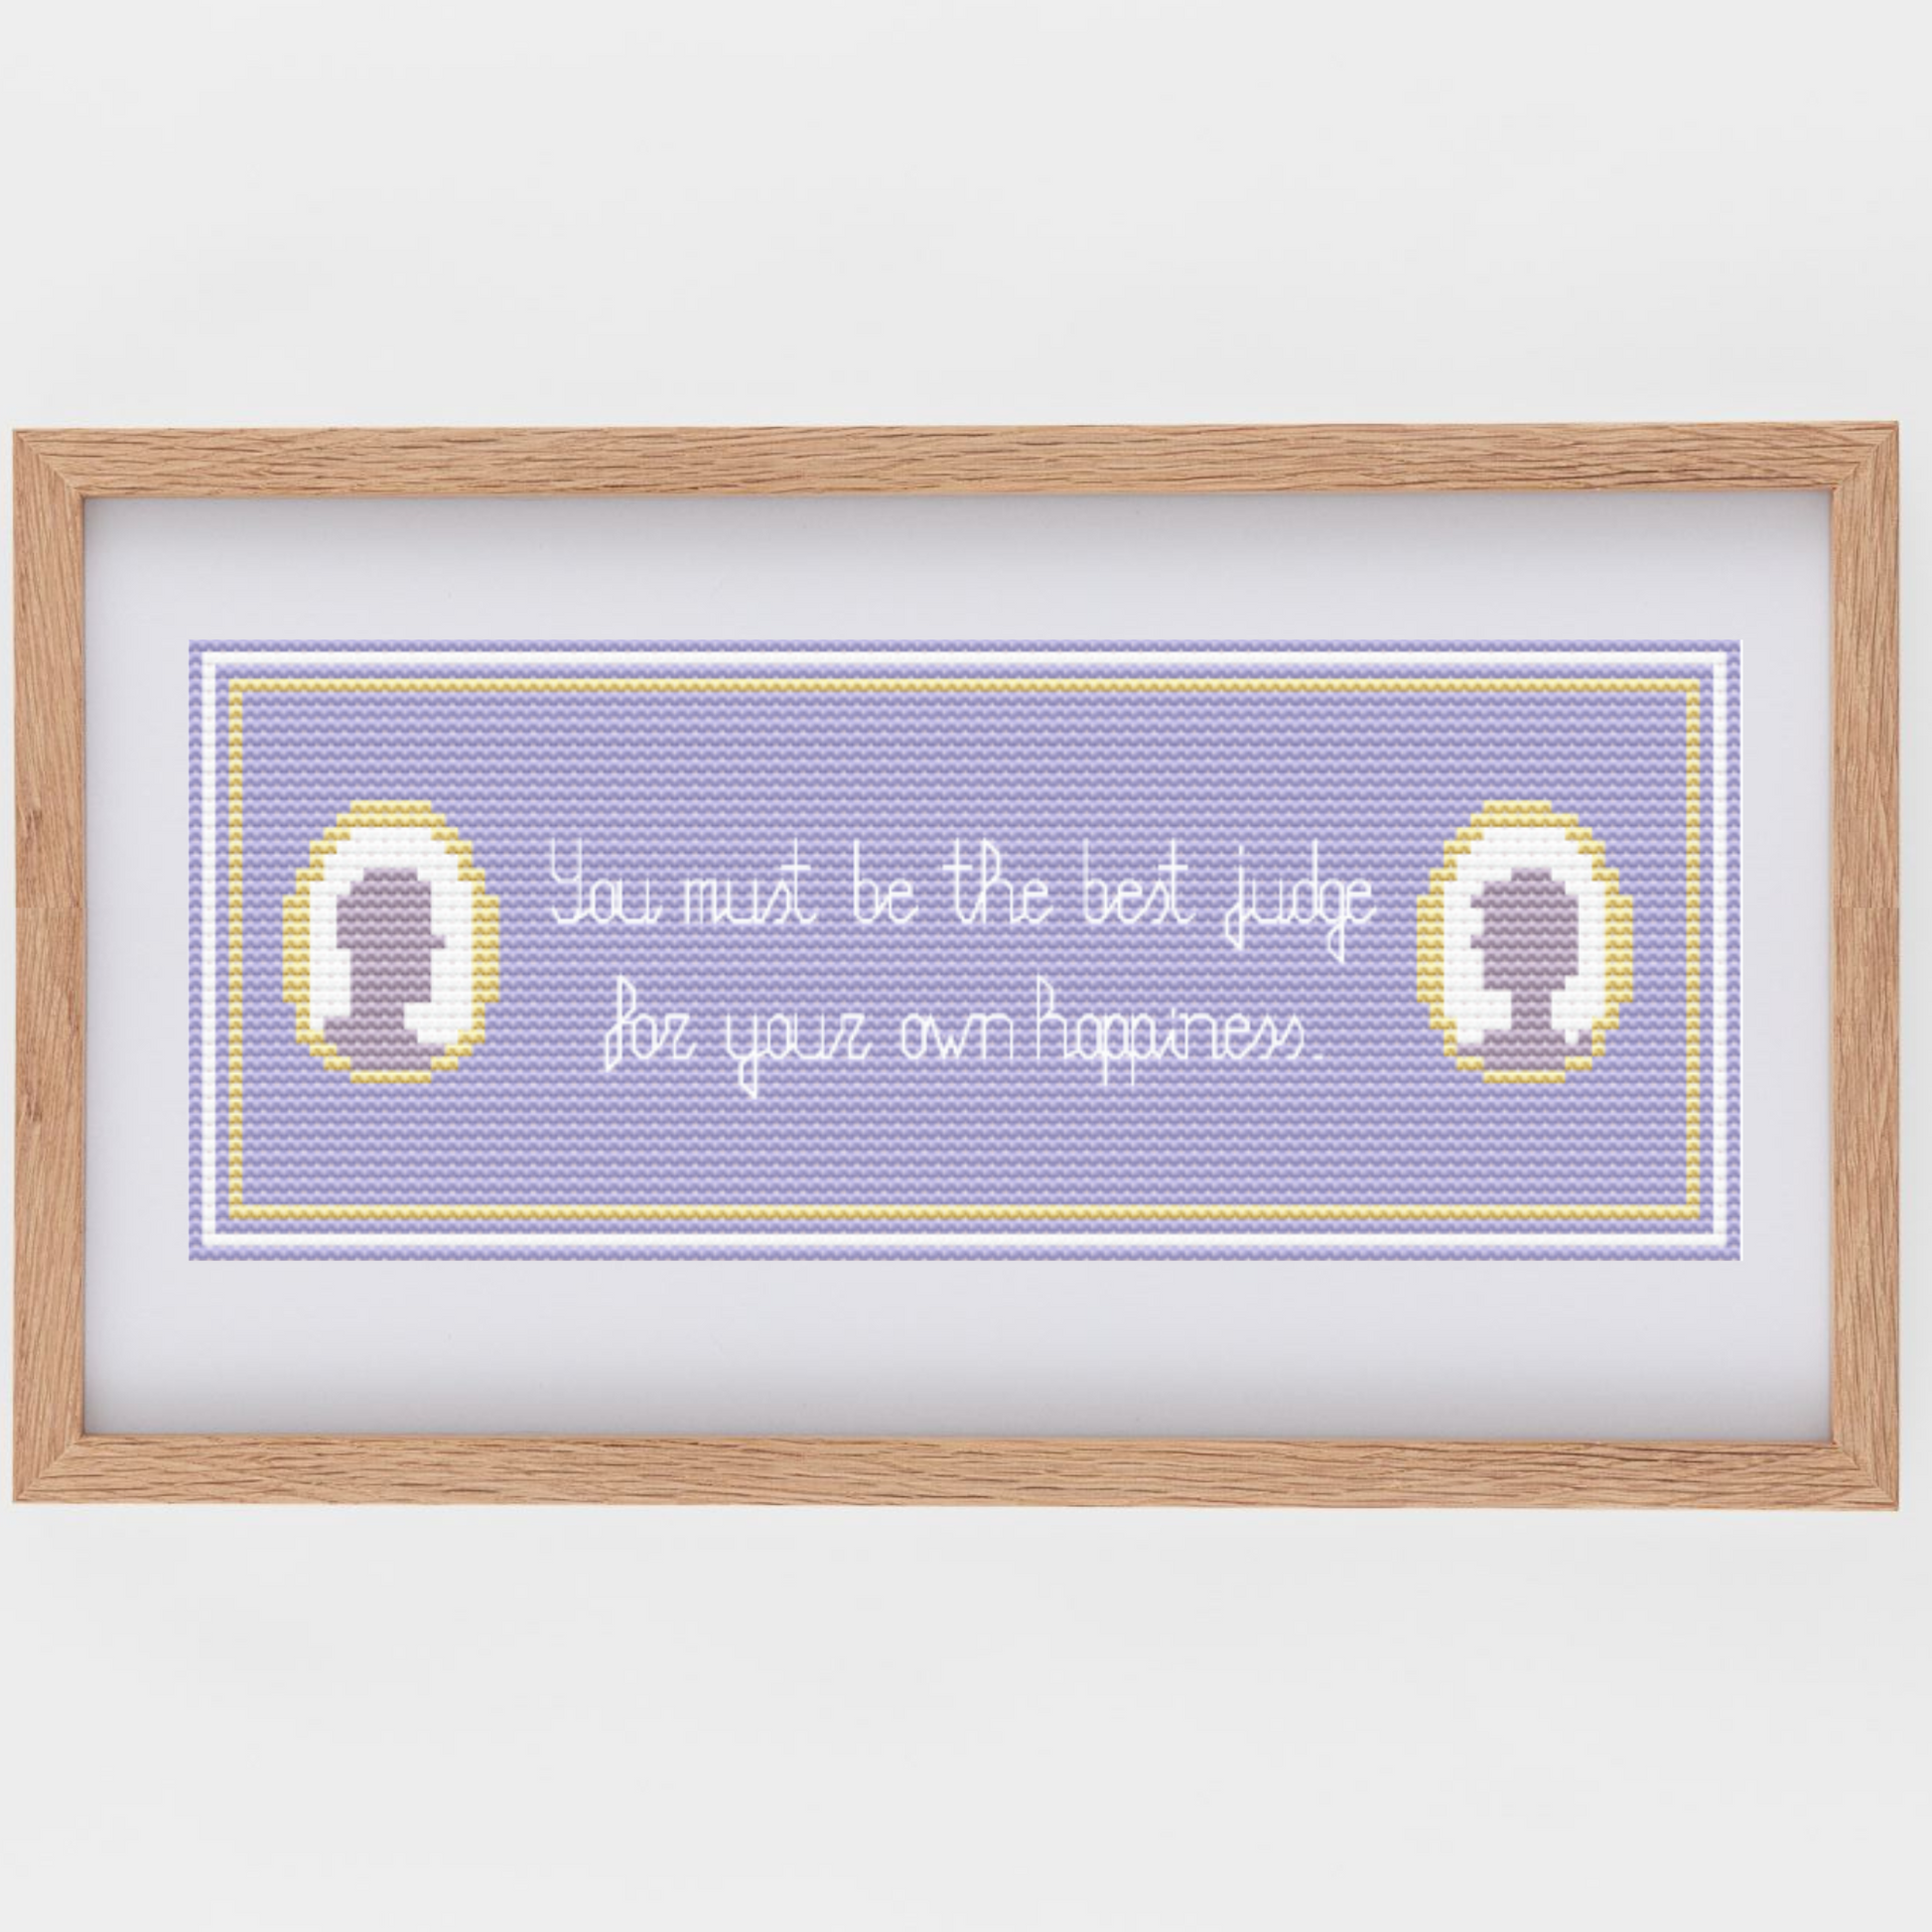 Emma Bookmark Cross-Stitch Pattern With Quotes from the Book Novel by Jane Austen | Cross Stitch Charts in PDF